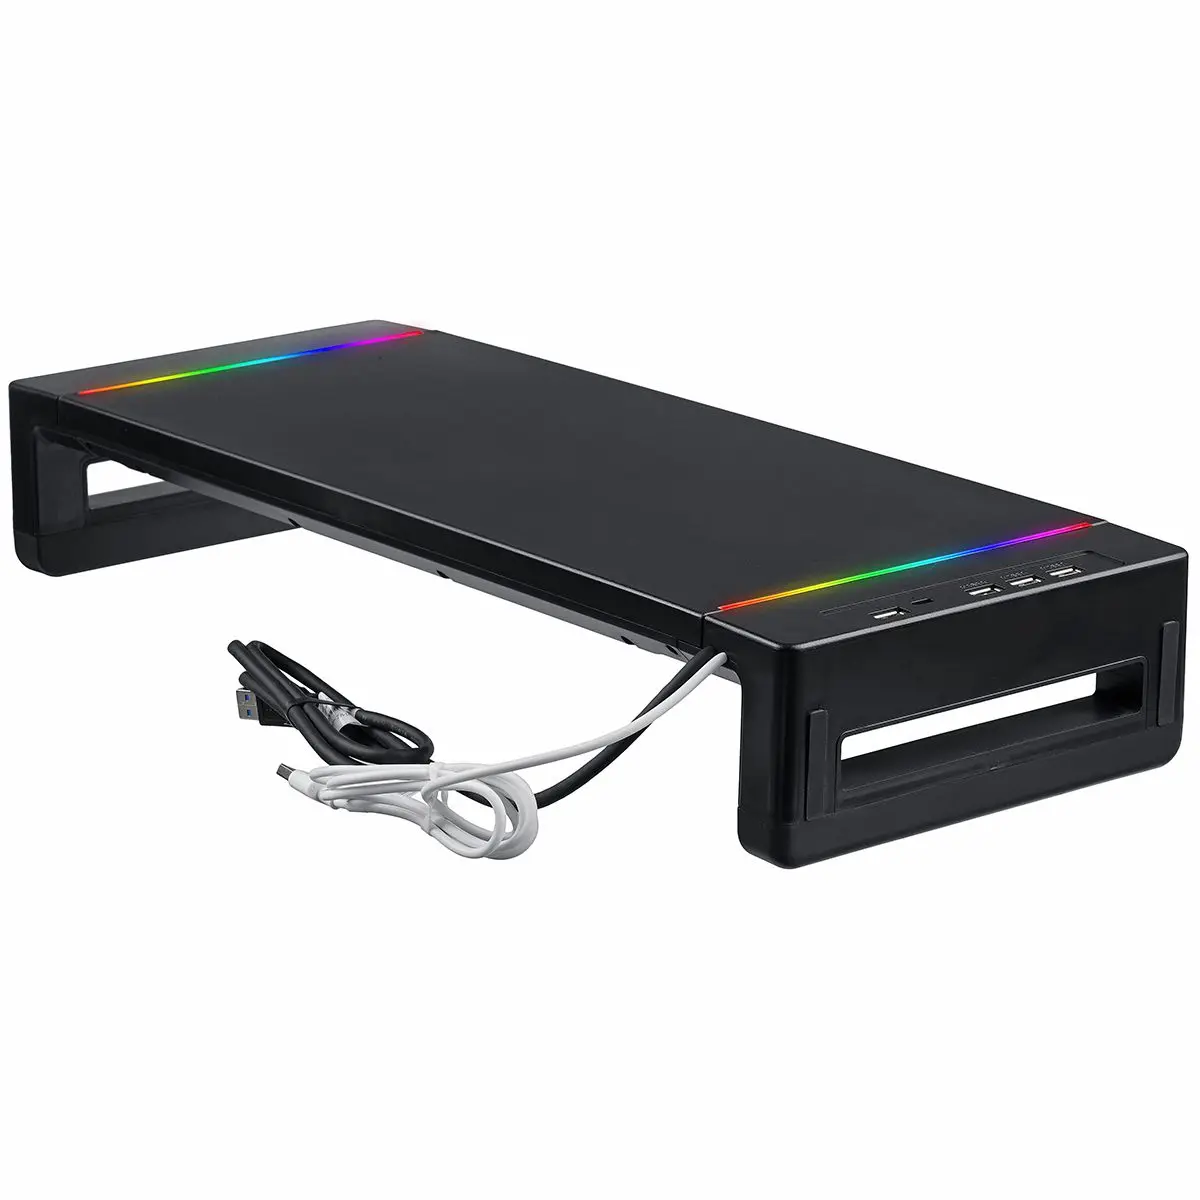 RGB Monitor Stand Riser Desk Support 3 USB3.0 Keyboard Mouse Storage Shelf Screen Rack with Charging Cable Drawer Phone Holder images - 6